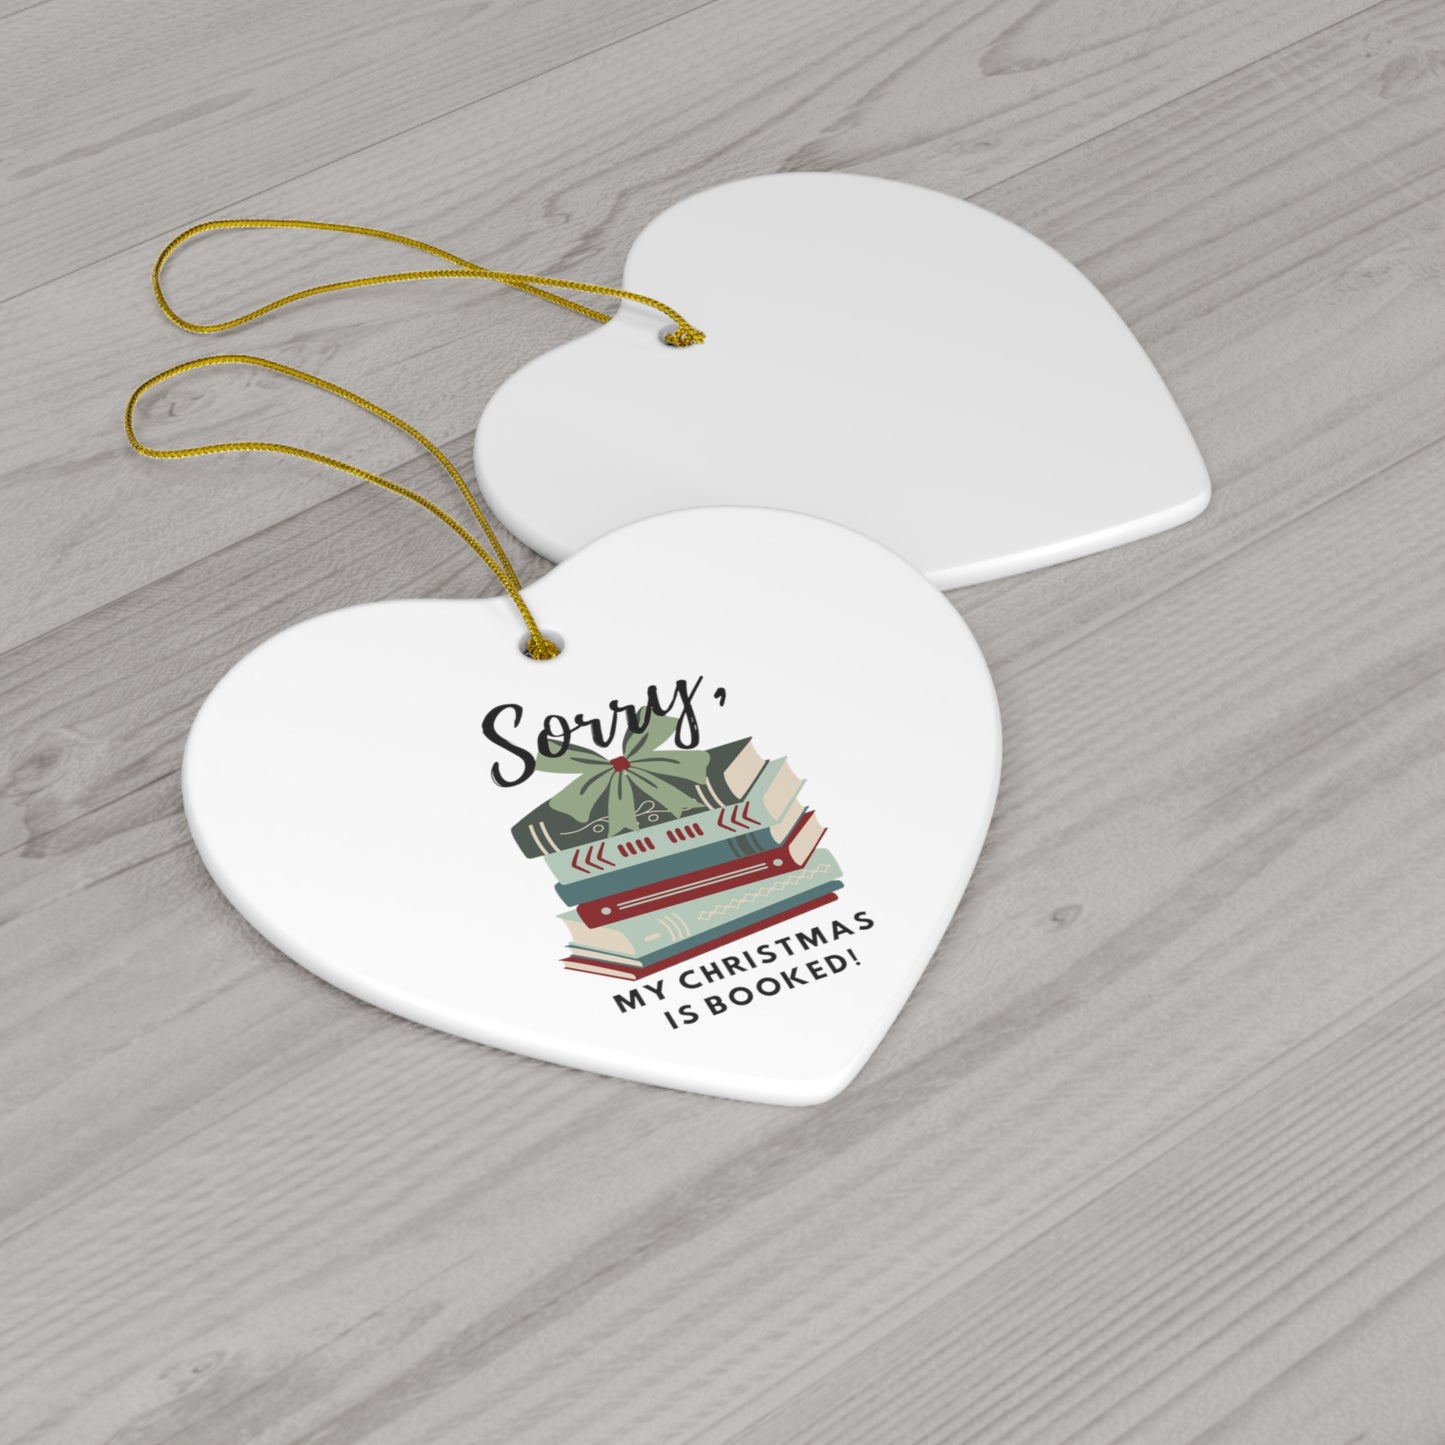 "Sorry, my Christmas is booked!" Ceramic Ornament